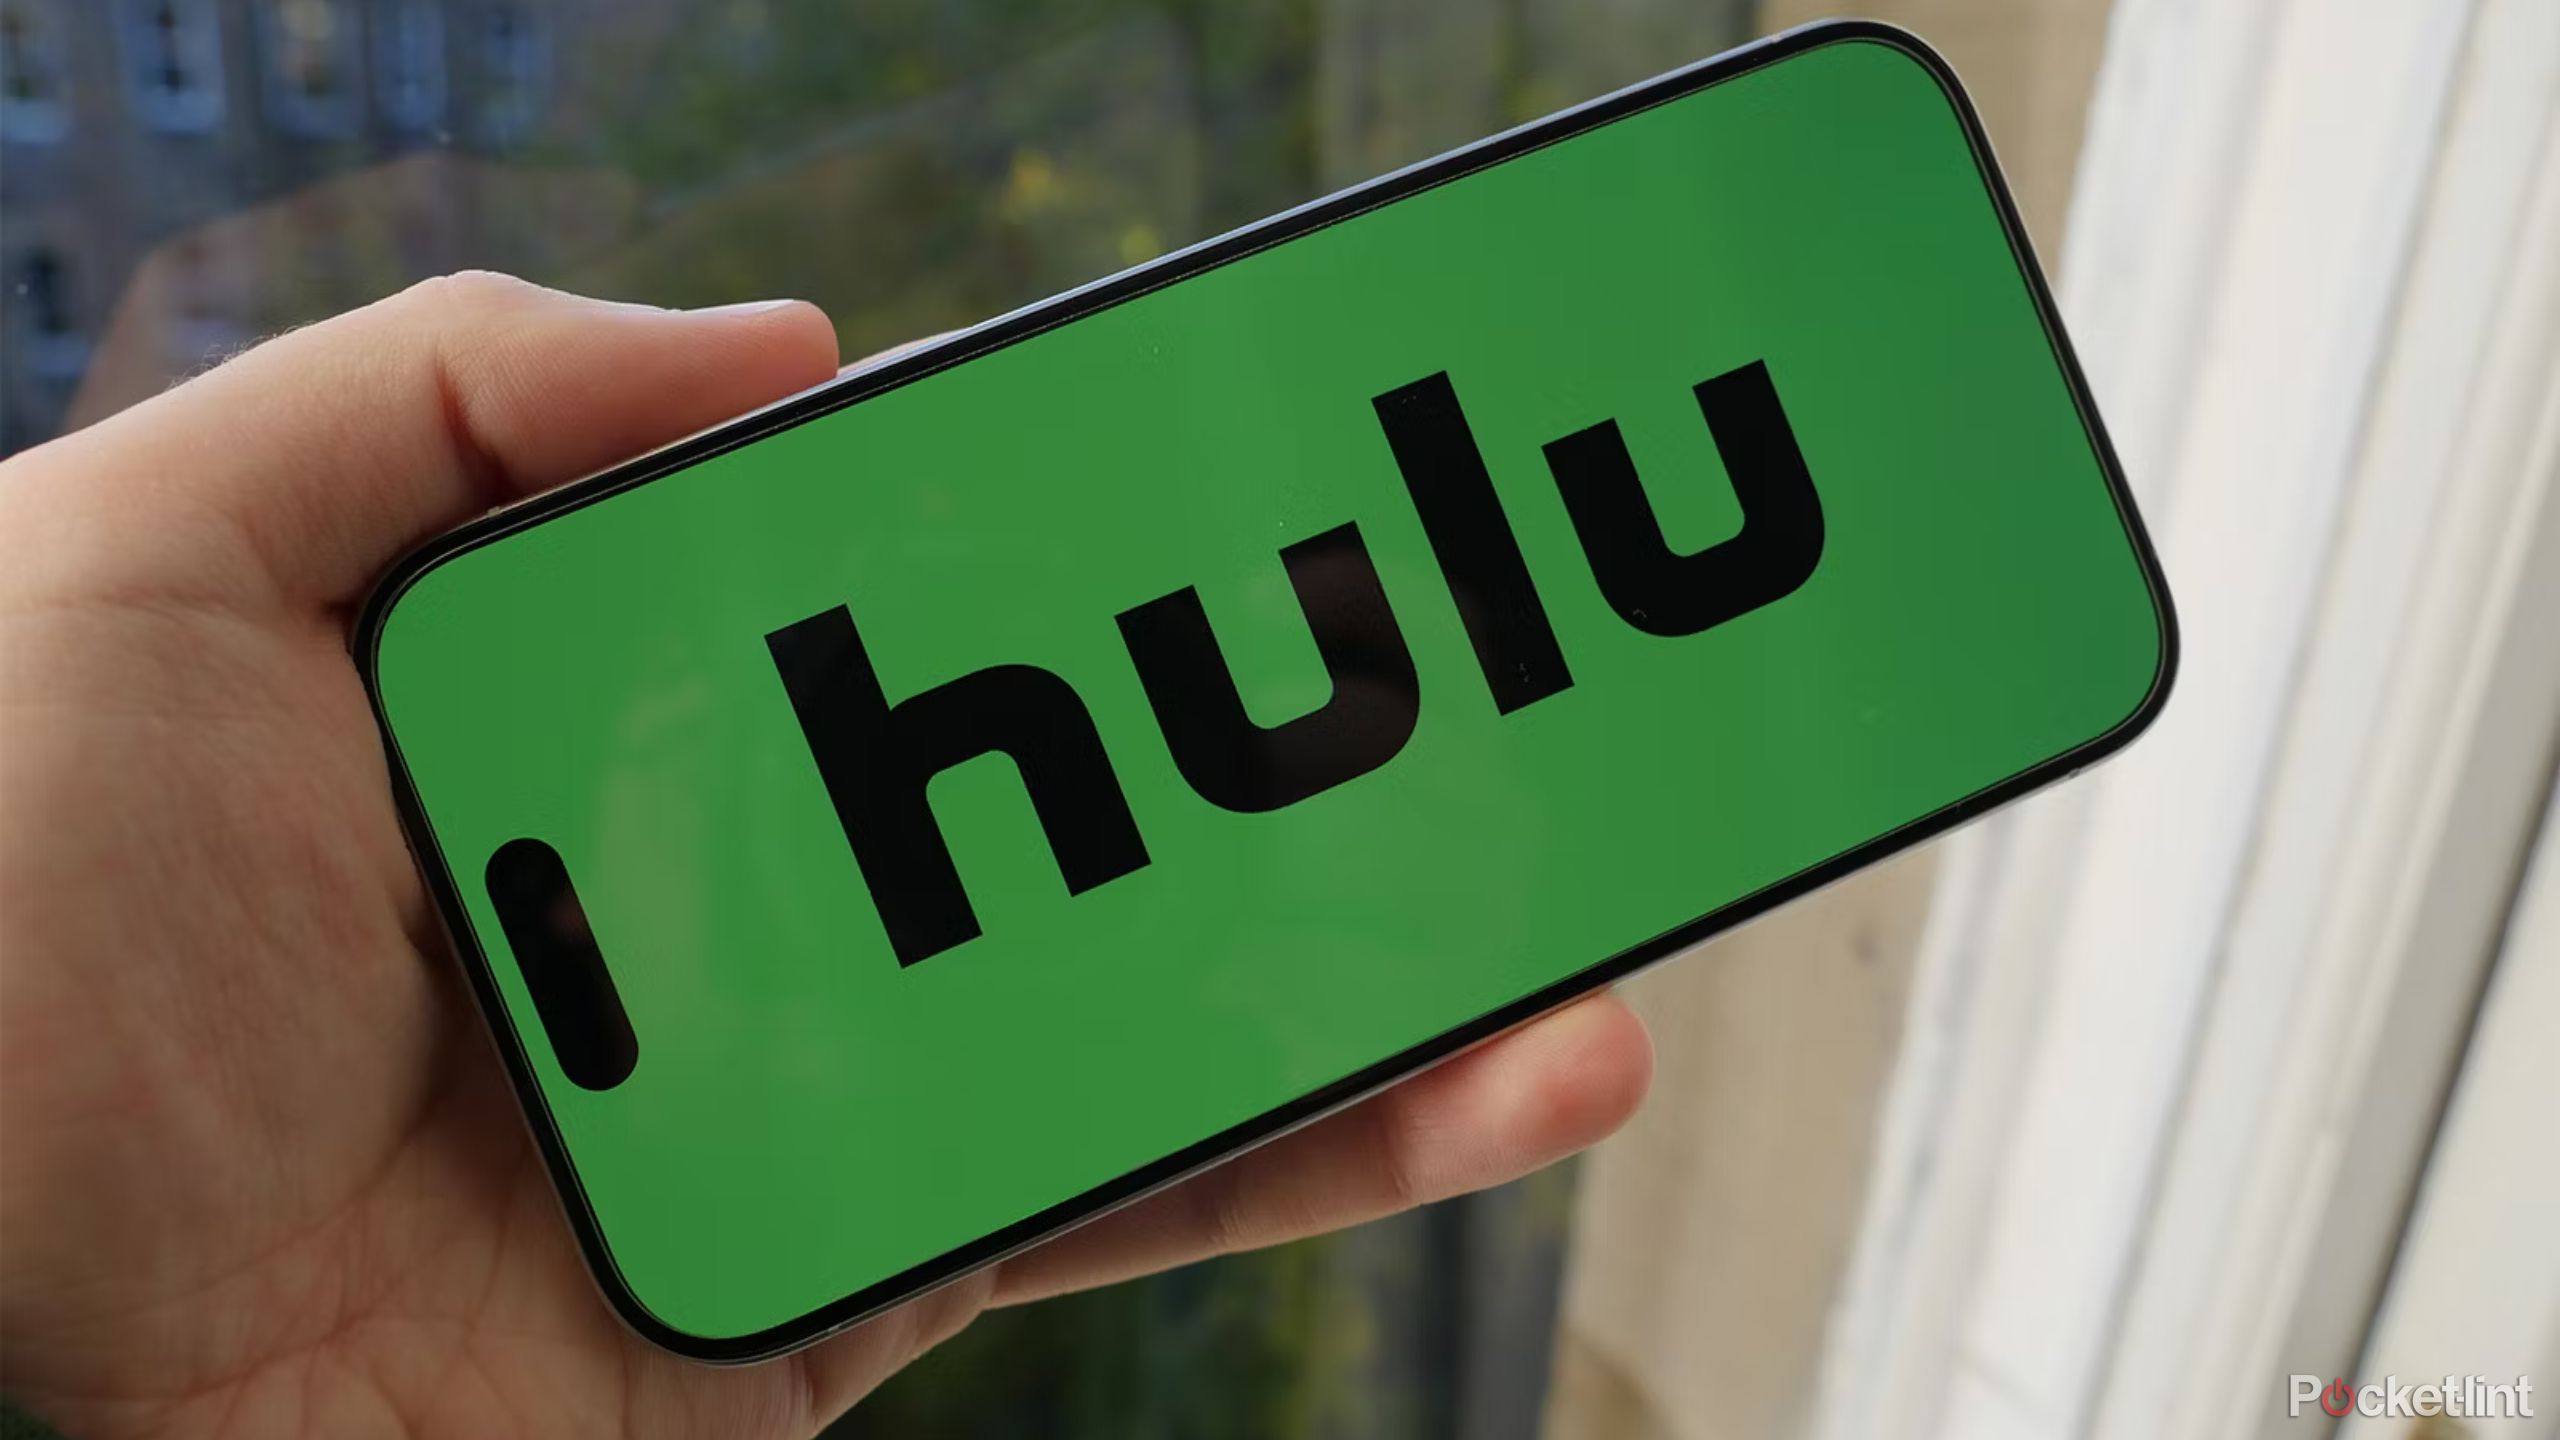 Hulu logo on a phone being held landscape